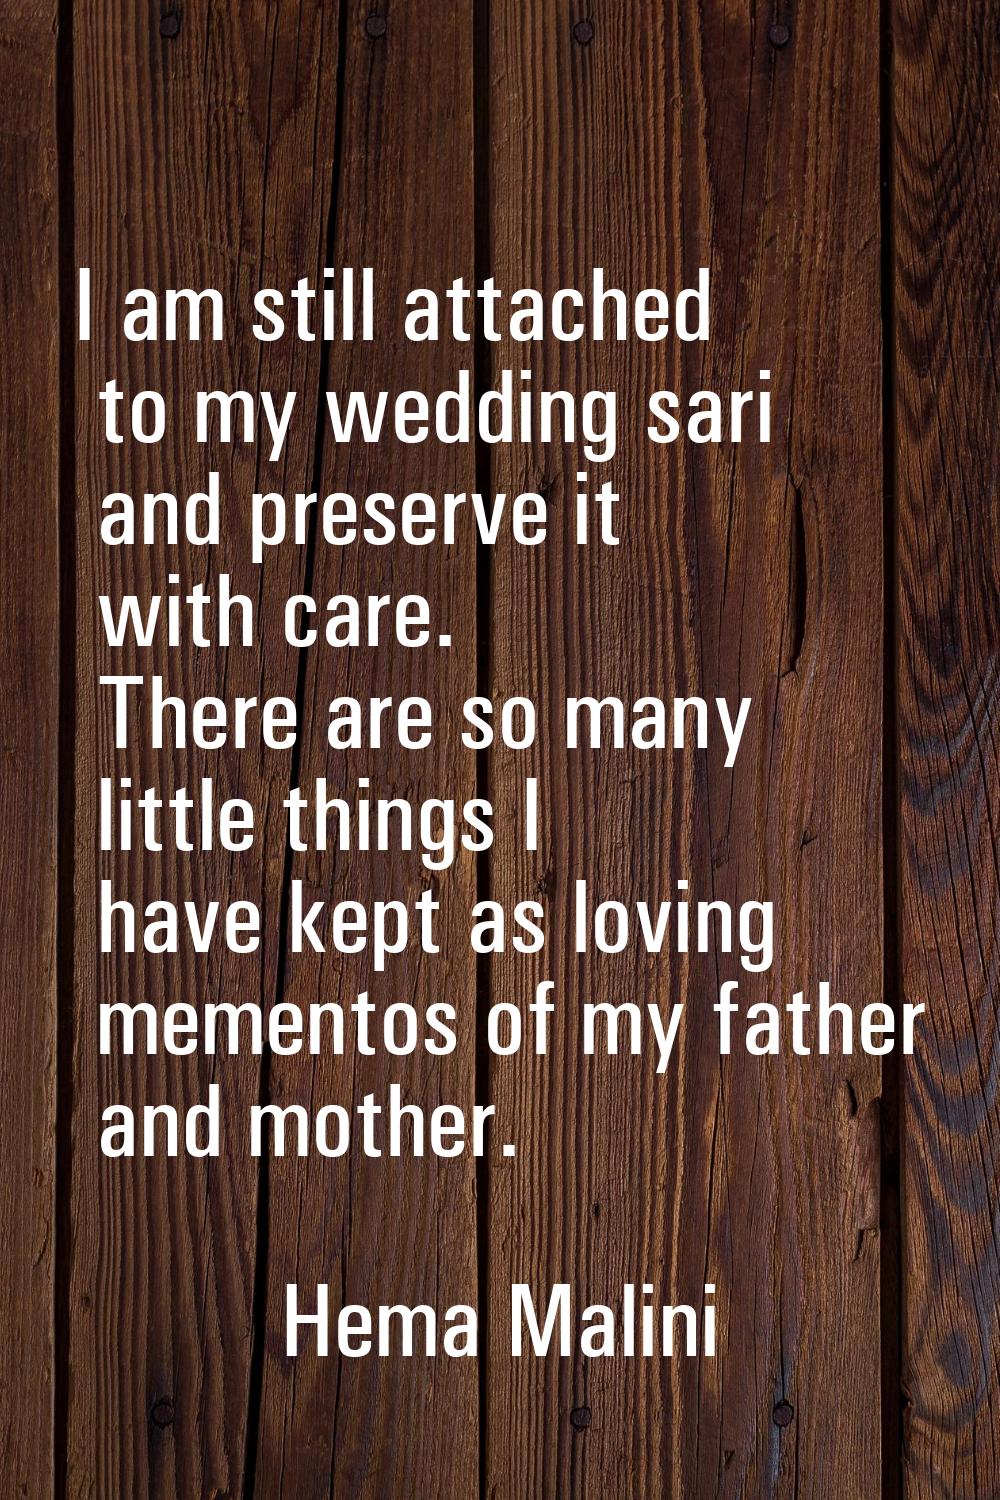 I am still attached to my wedding sari and preserve it with care. There are so many little things I